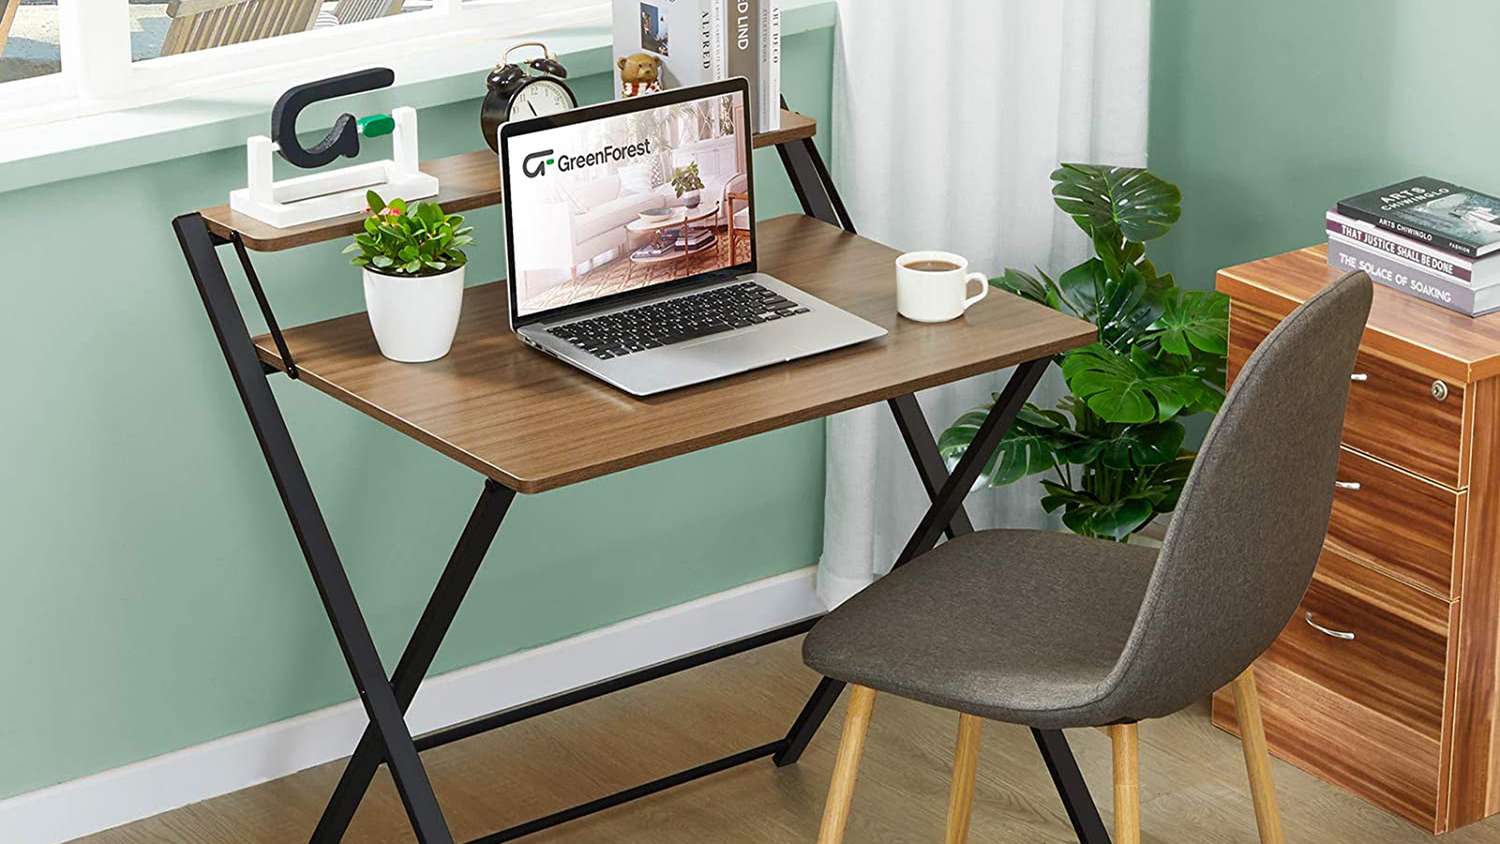 Beige Aingoo Modern Simple Computer Desk Writing Desk Home Office Desk Wooden Desk PC Laptop Desk with Unique R-shaped structure for Small Space ，Easy to assemble